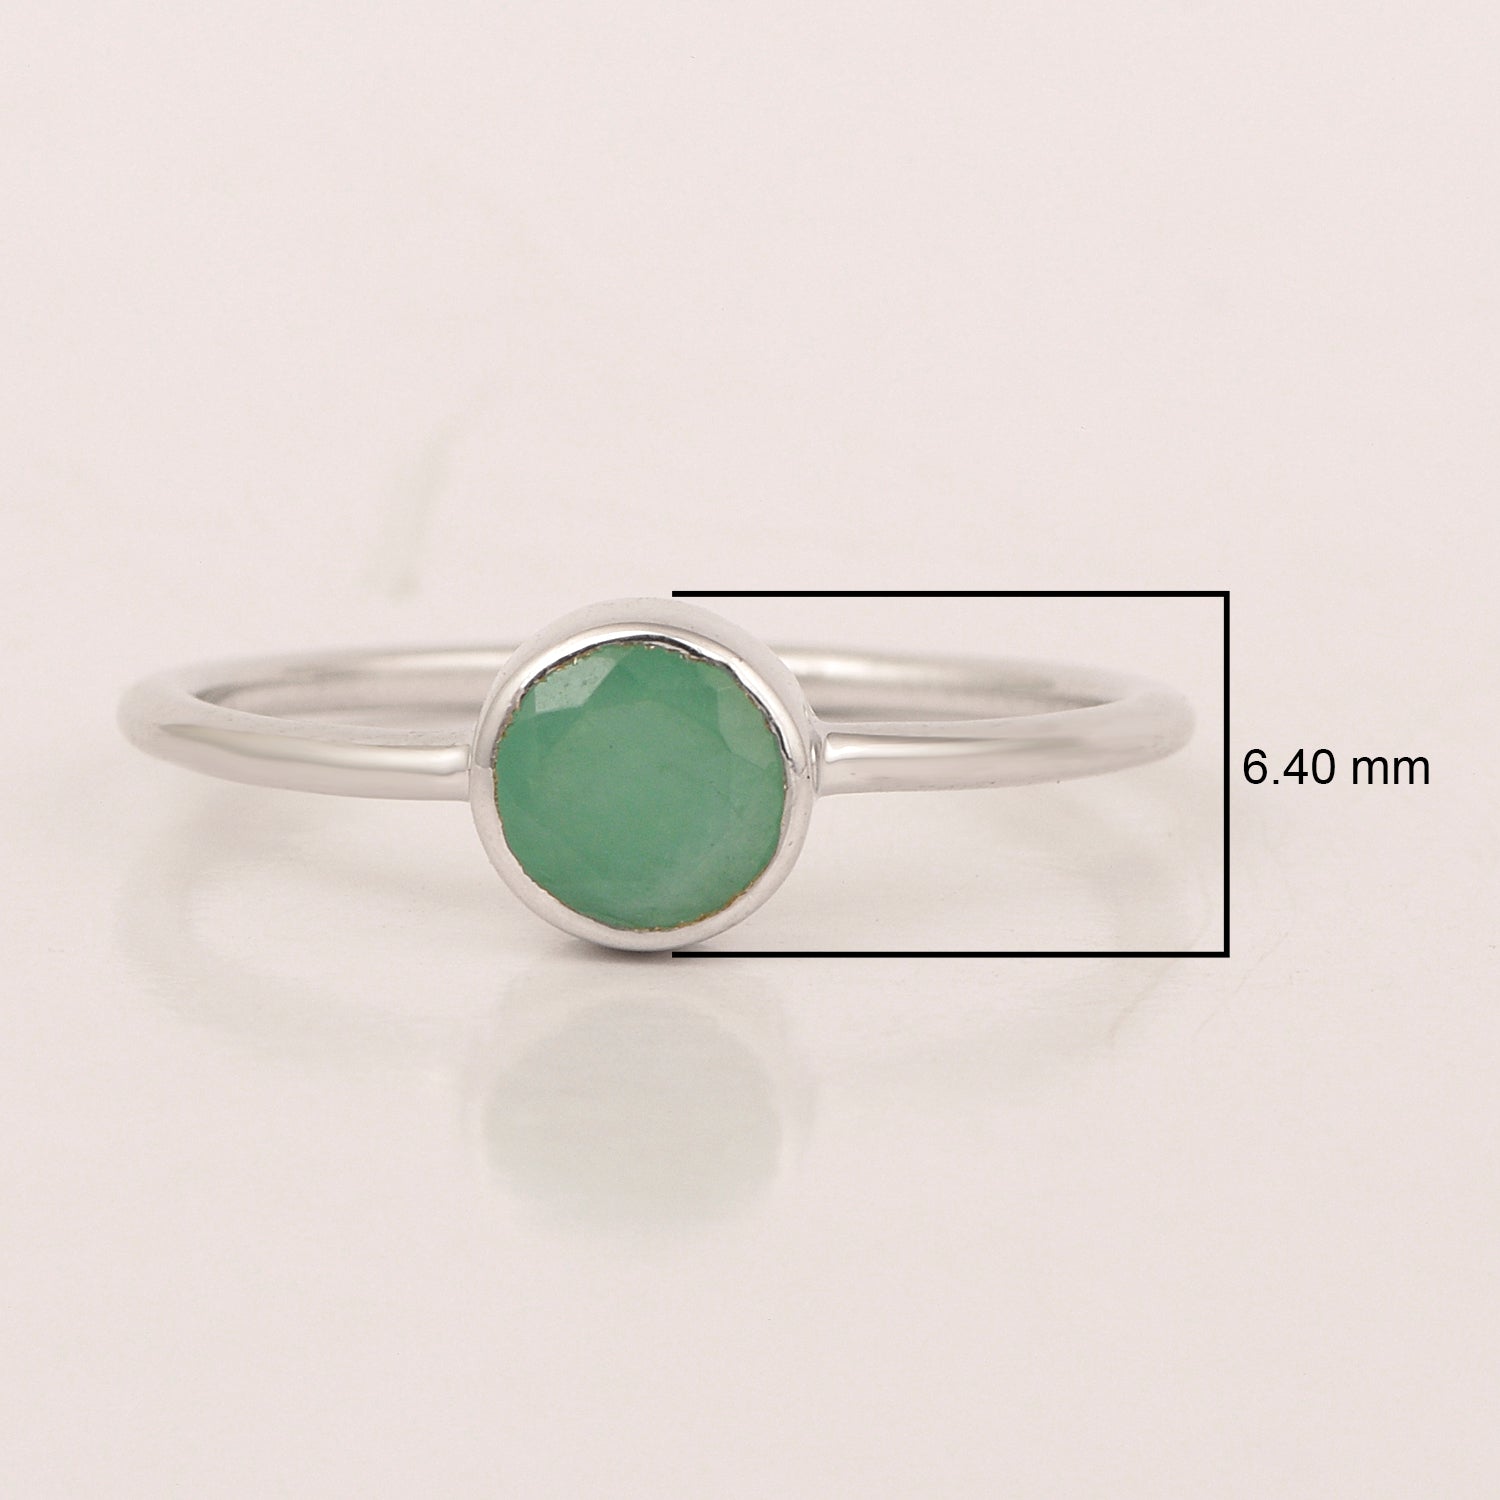 Buy Emerald green ring, Square gemstone green chalcedony silver ring online  at aStudio1980.com